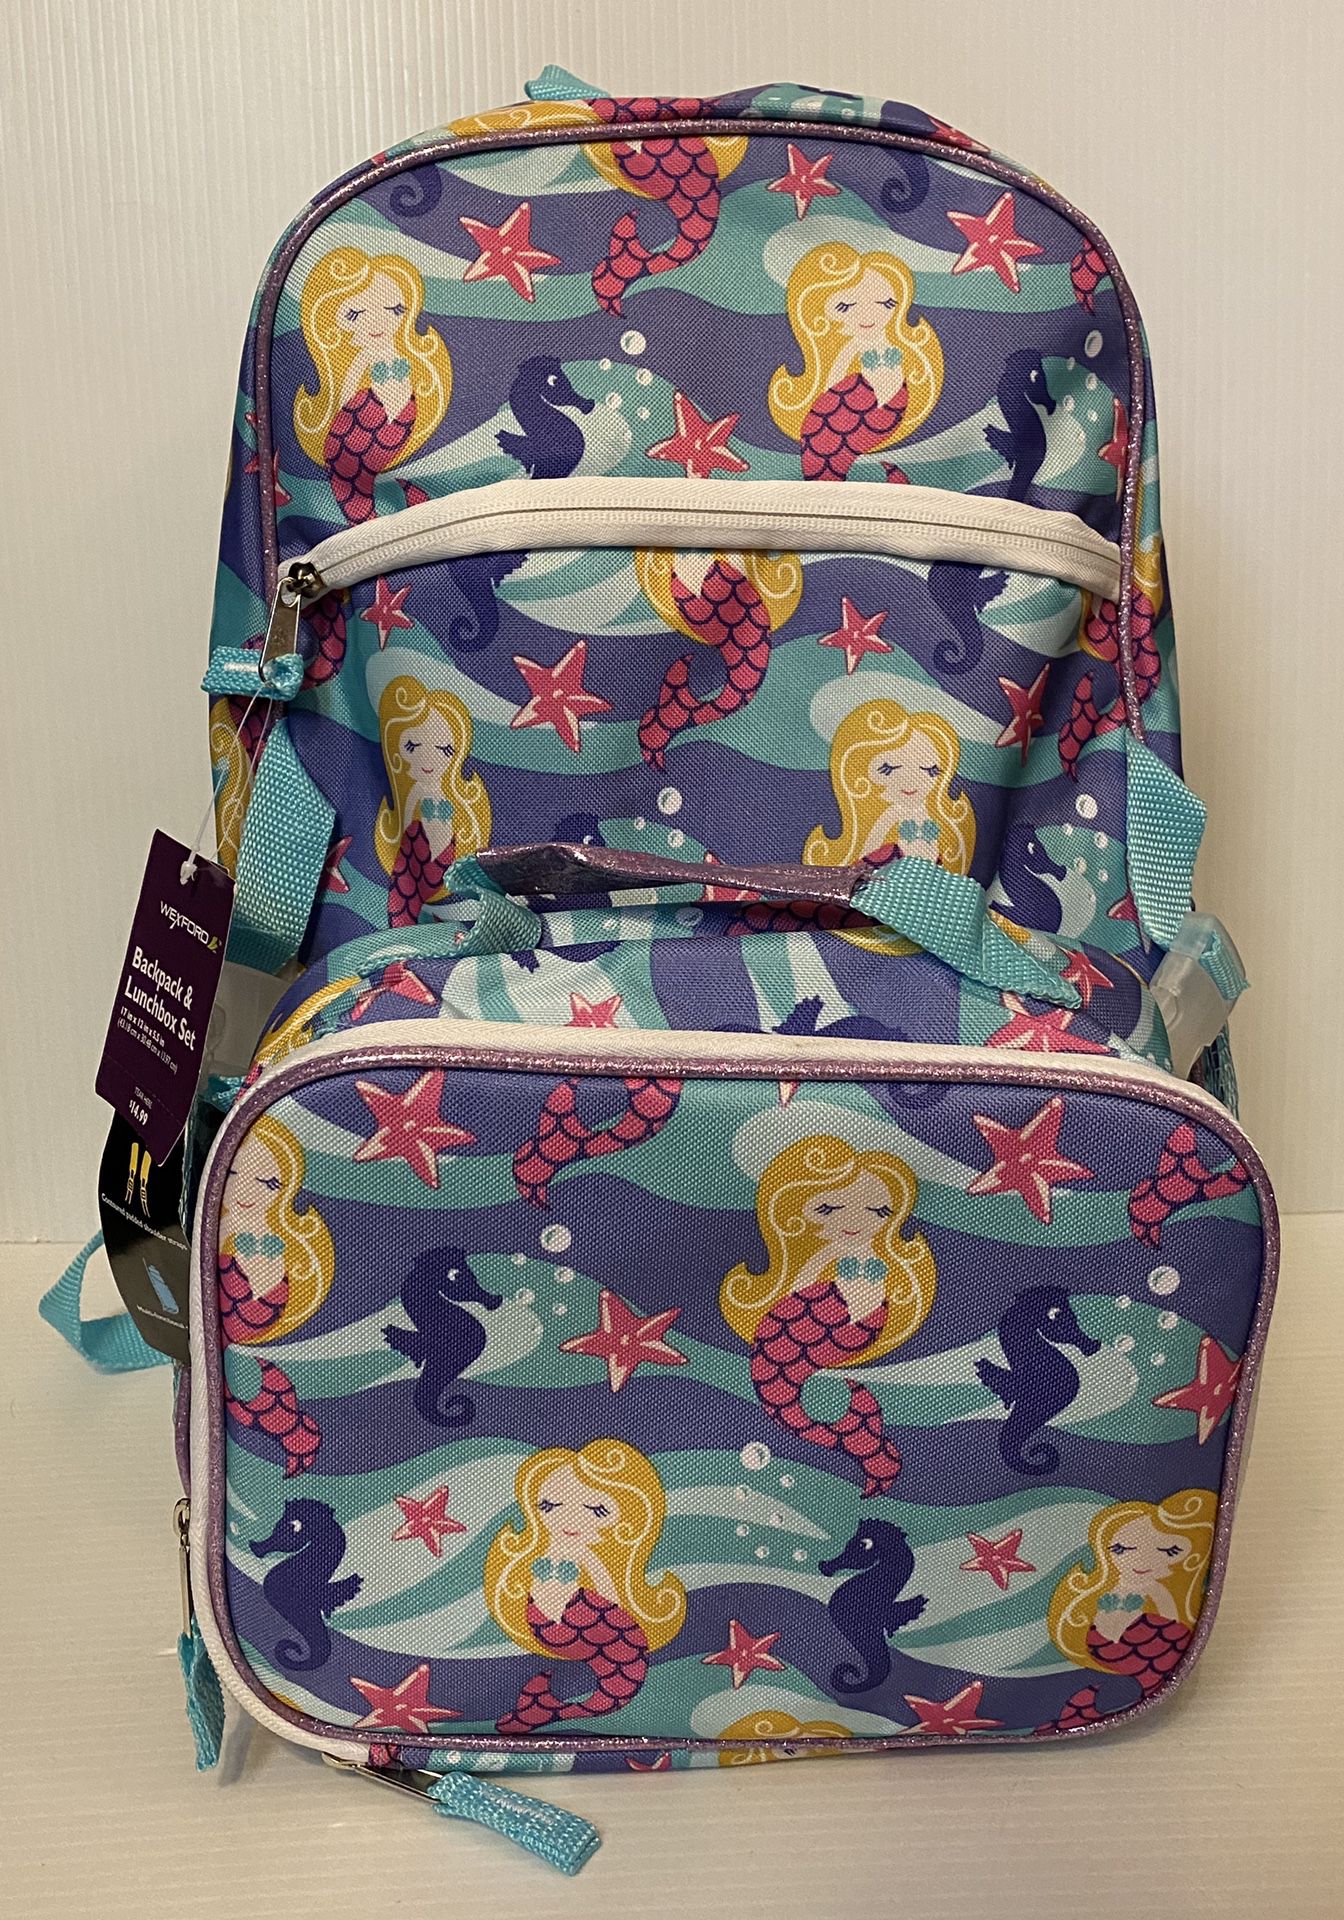 NEW backpack & lunchbox set! 14.99$ Retail